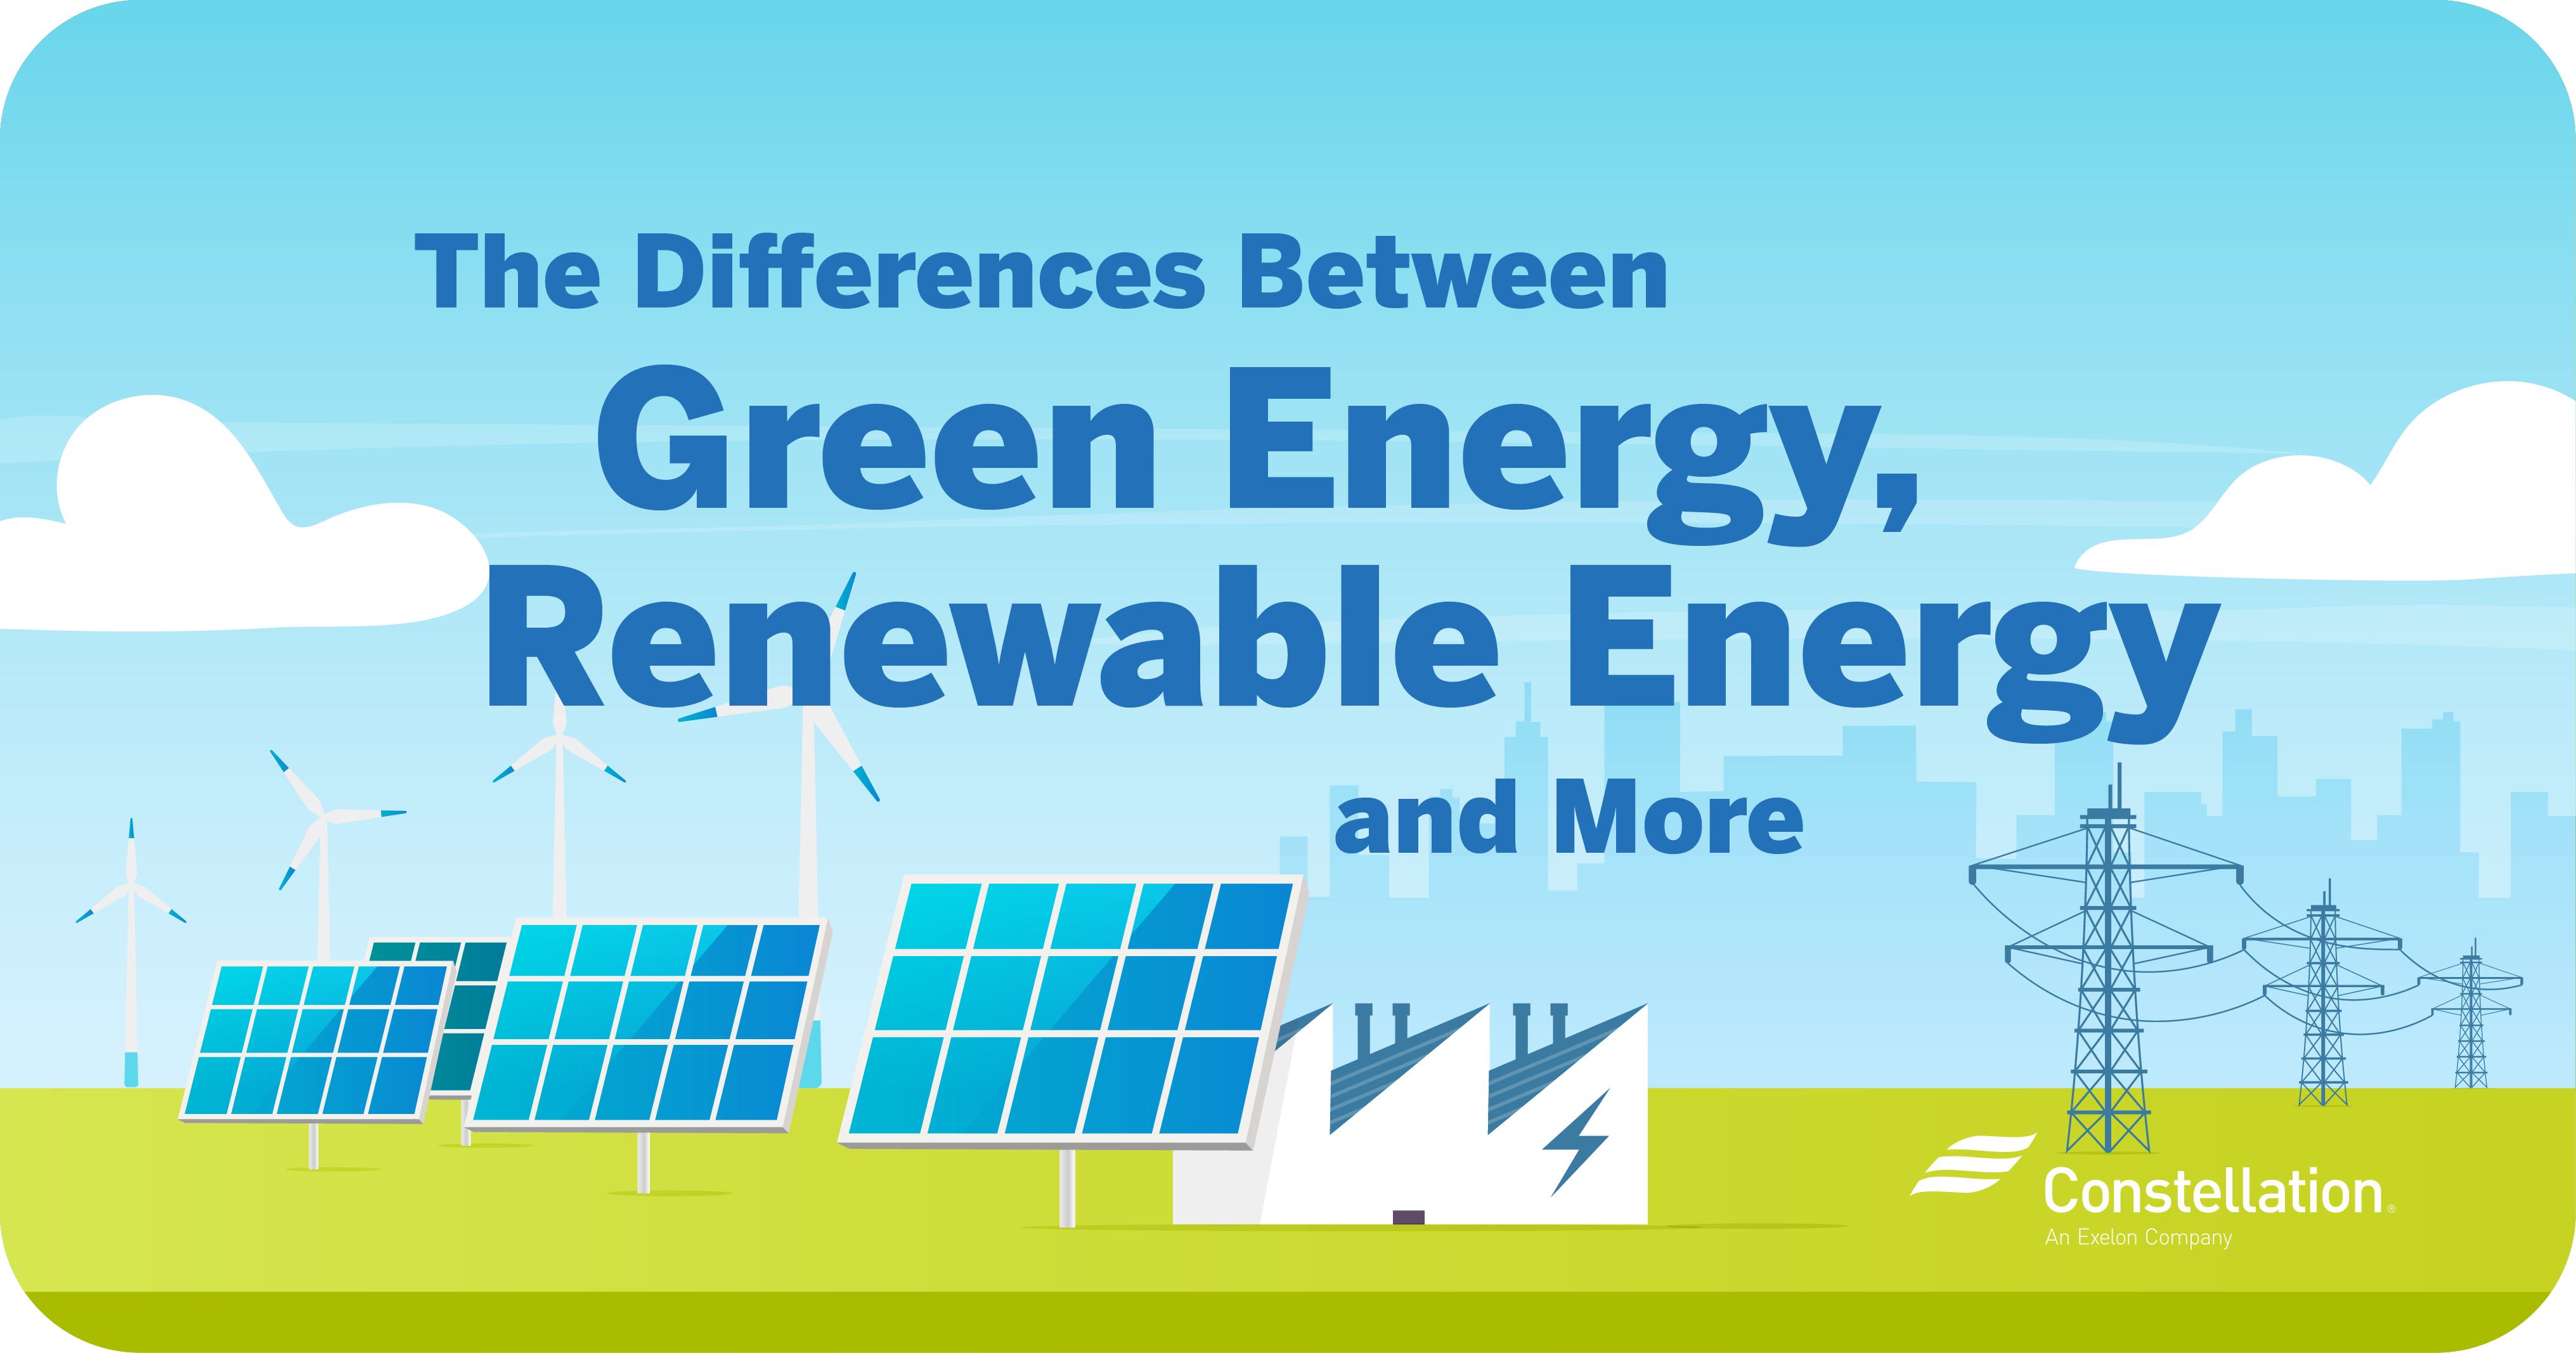 The differences between green energy, renewable energy and more